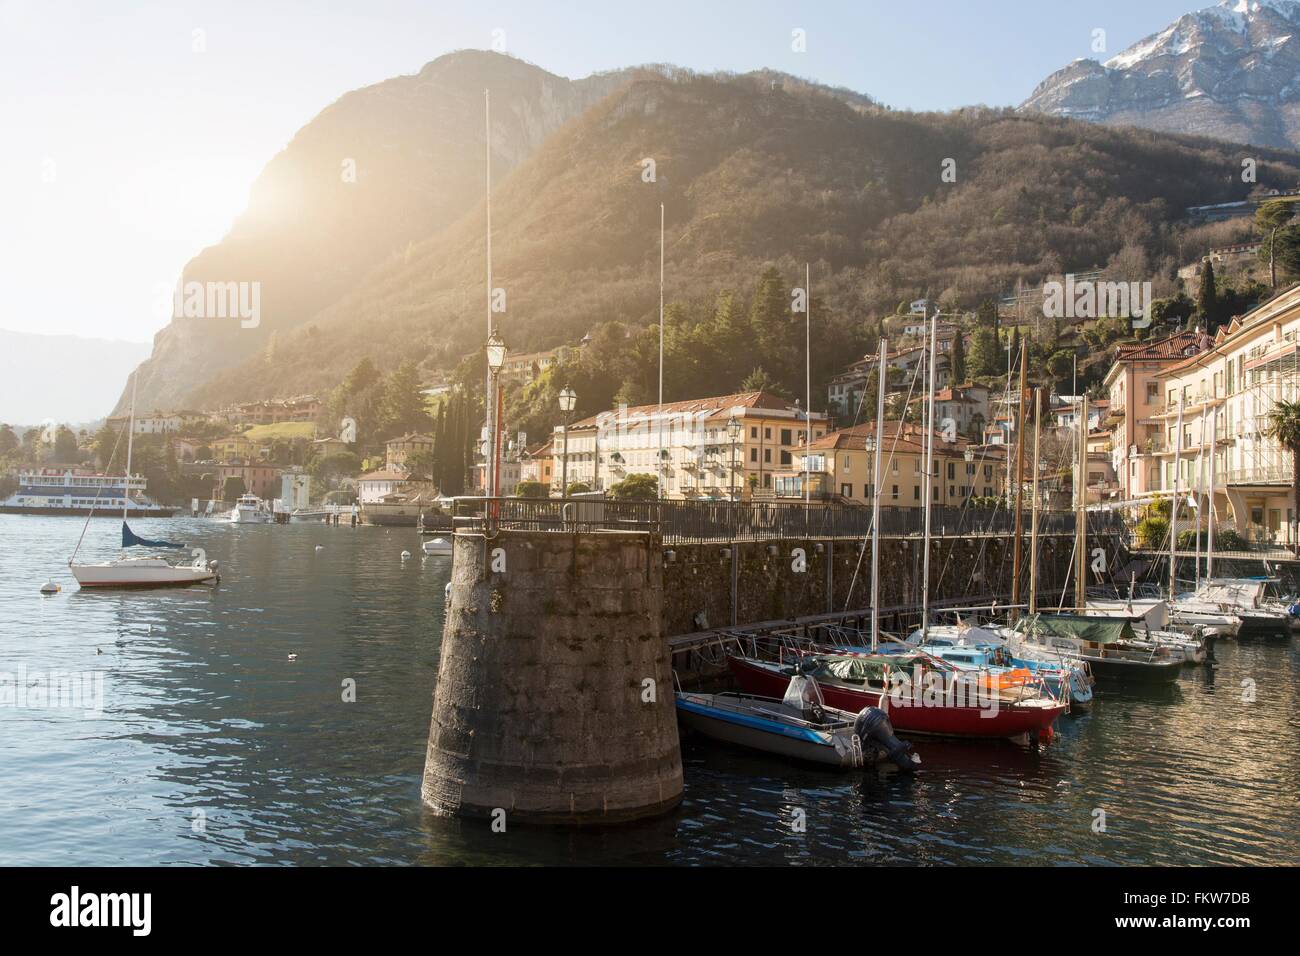 Boats moored in sunlit harbor, Lake Como, Italy Stock Photo